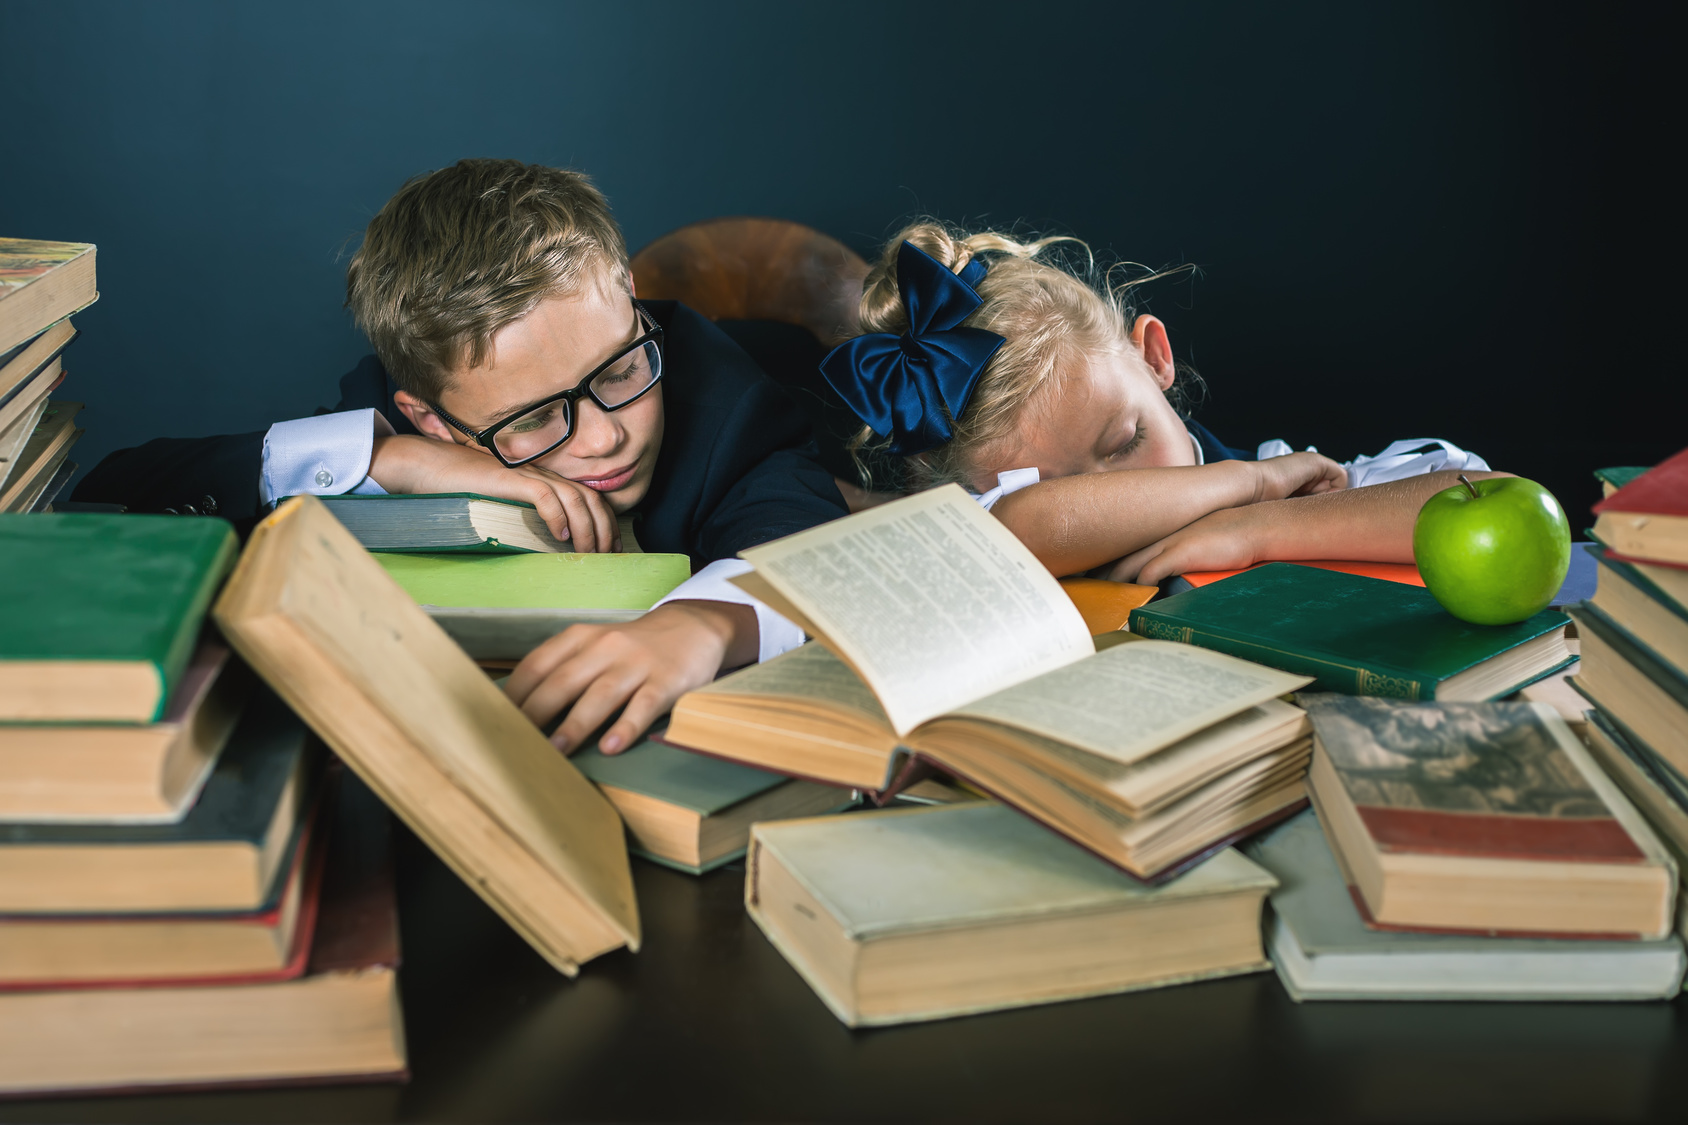 Motivate your child to study a boring subject